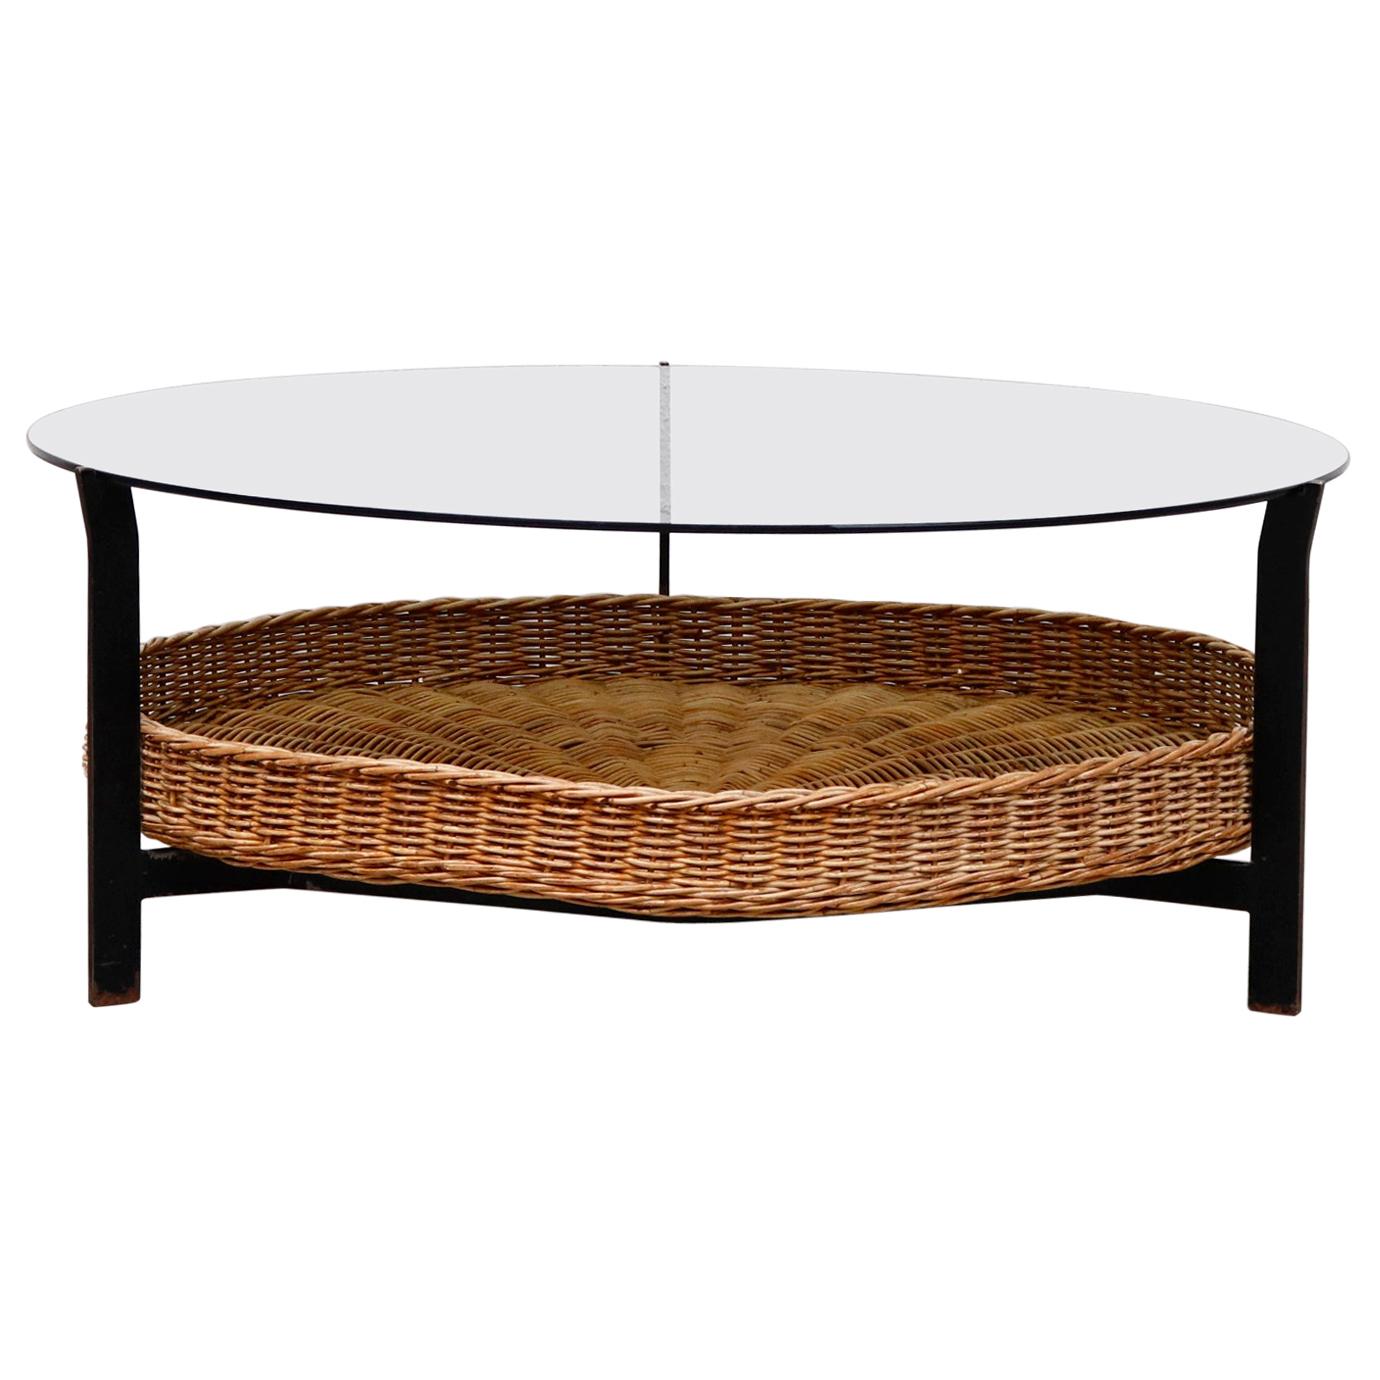 Mid-Century Modernist Coffee Table with Rattan Basket